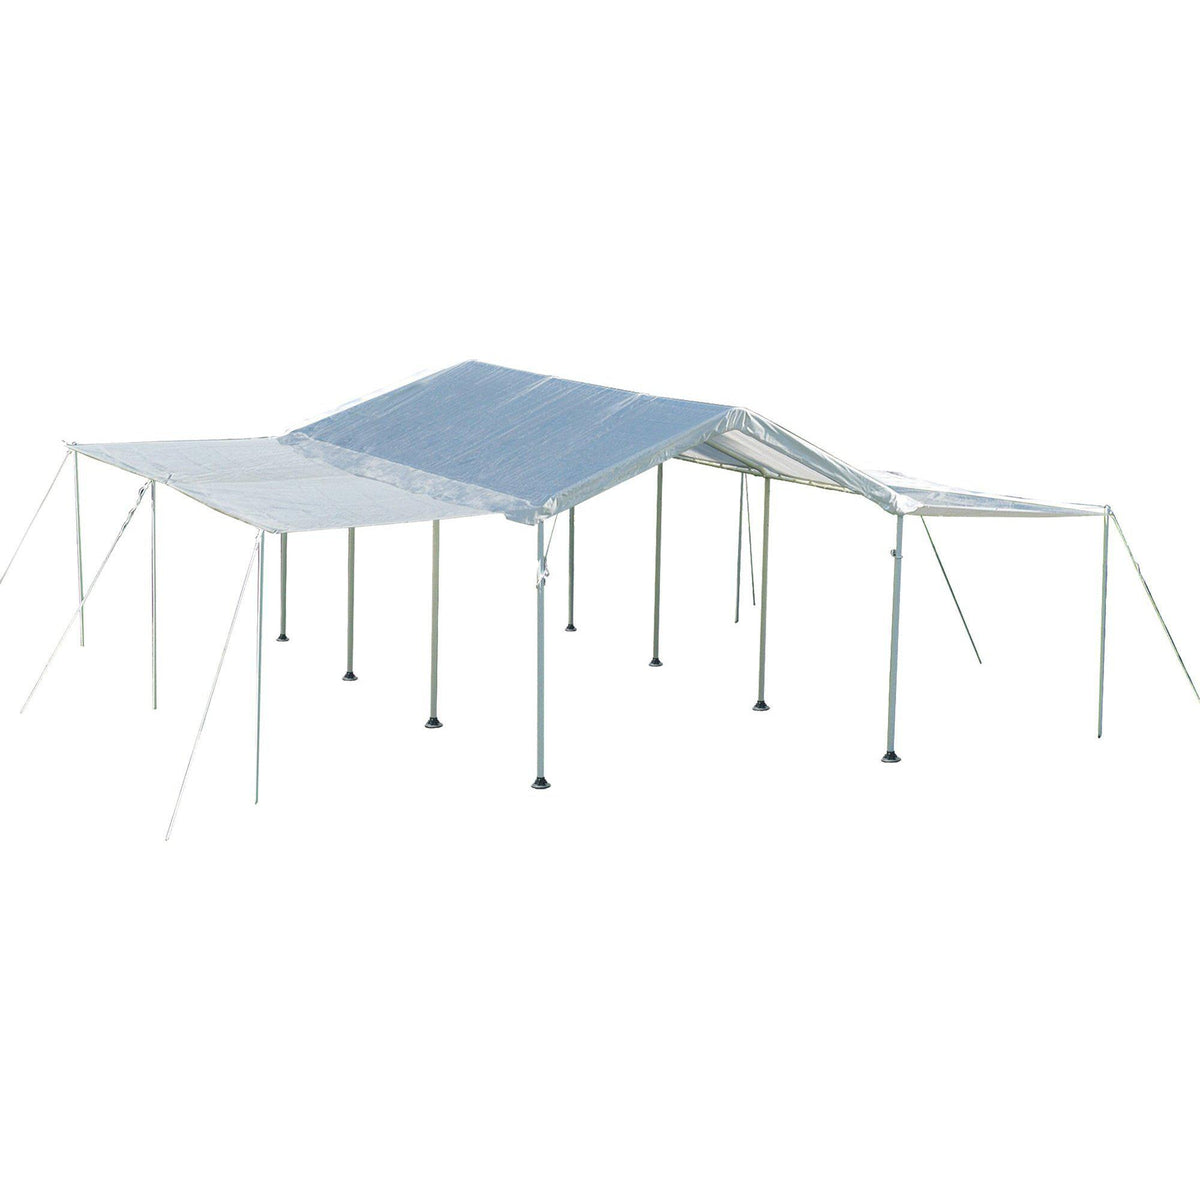 ShelterLogic MaxAP 2-in-1 Canopy with Extension Kit, White, 10 x 20 ft.